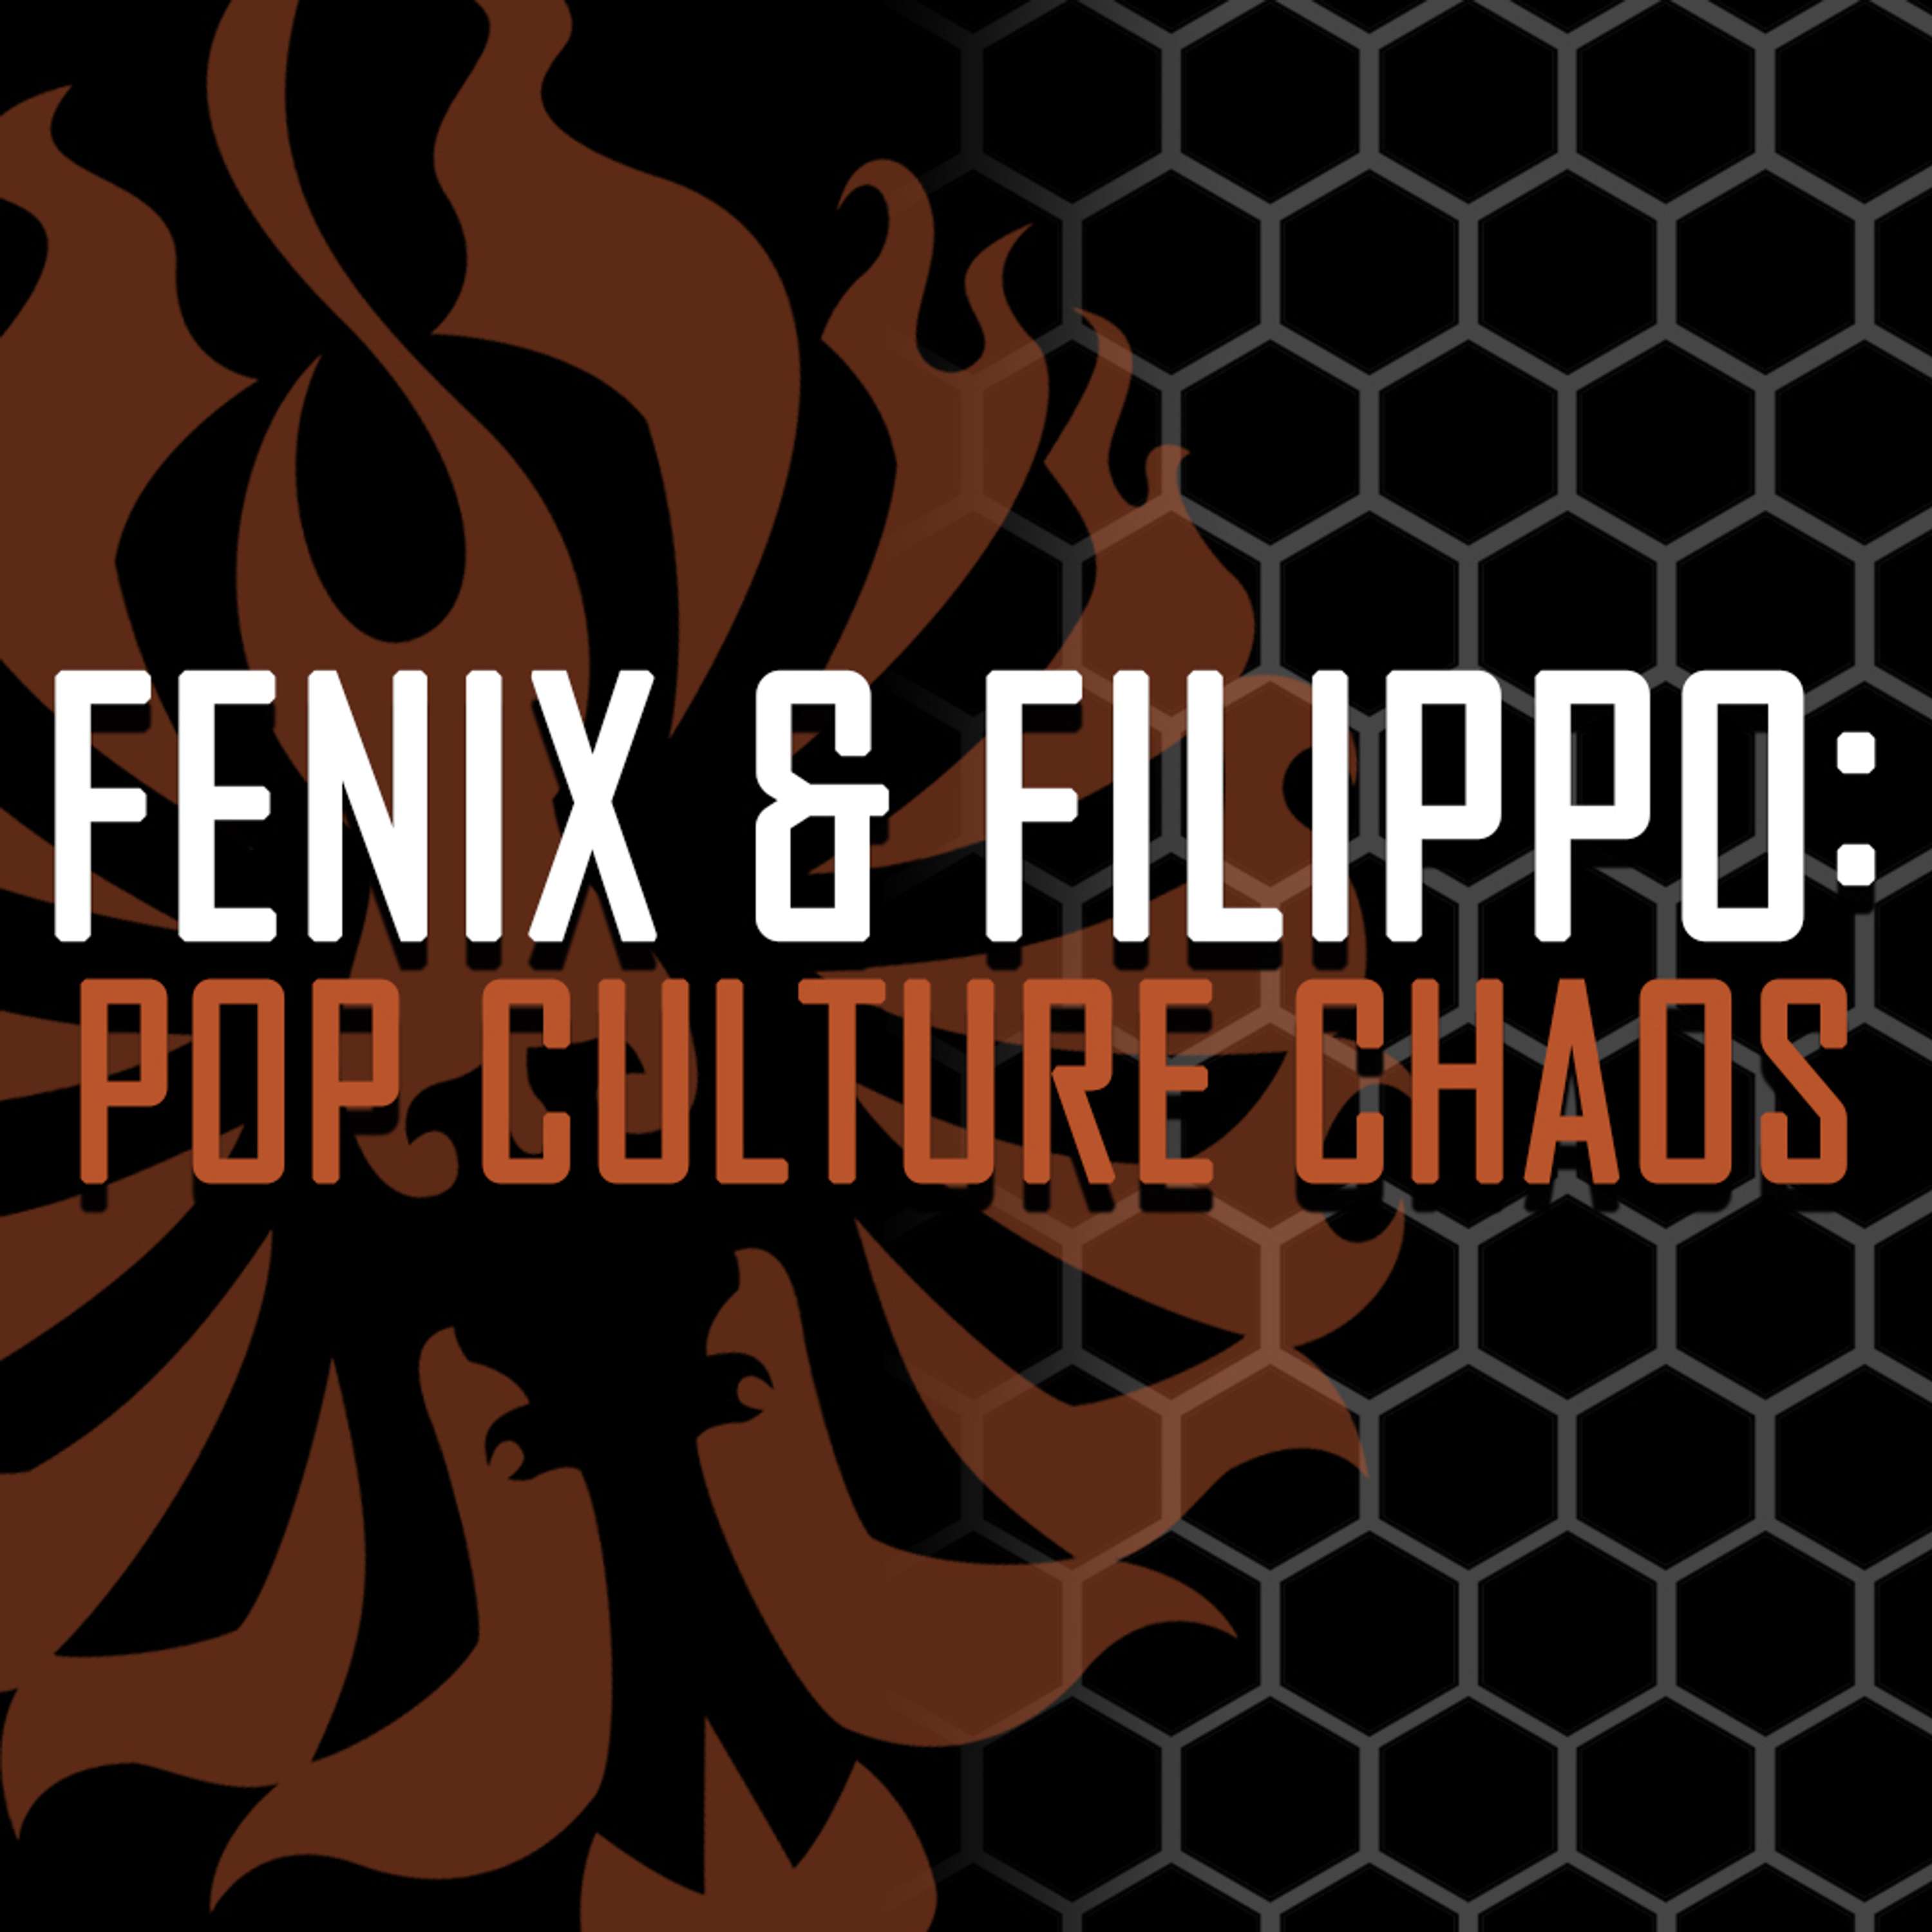 Fenix & Filippo: Pop Culture Chaos - Tuesday, September 28th 2021 with Nerd News, Review of Marvel's What If...?, He-Man And The Masters Of The Universe, & Kollector Korner